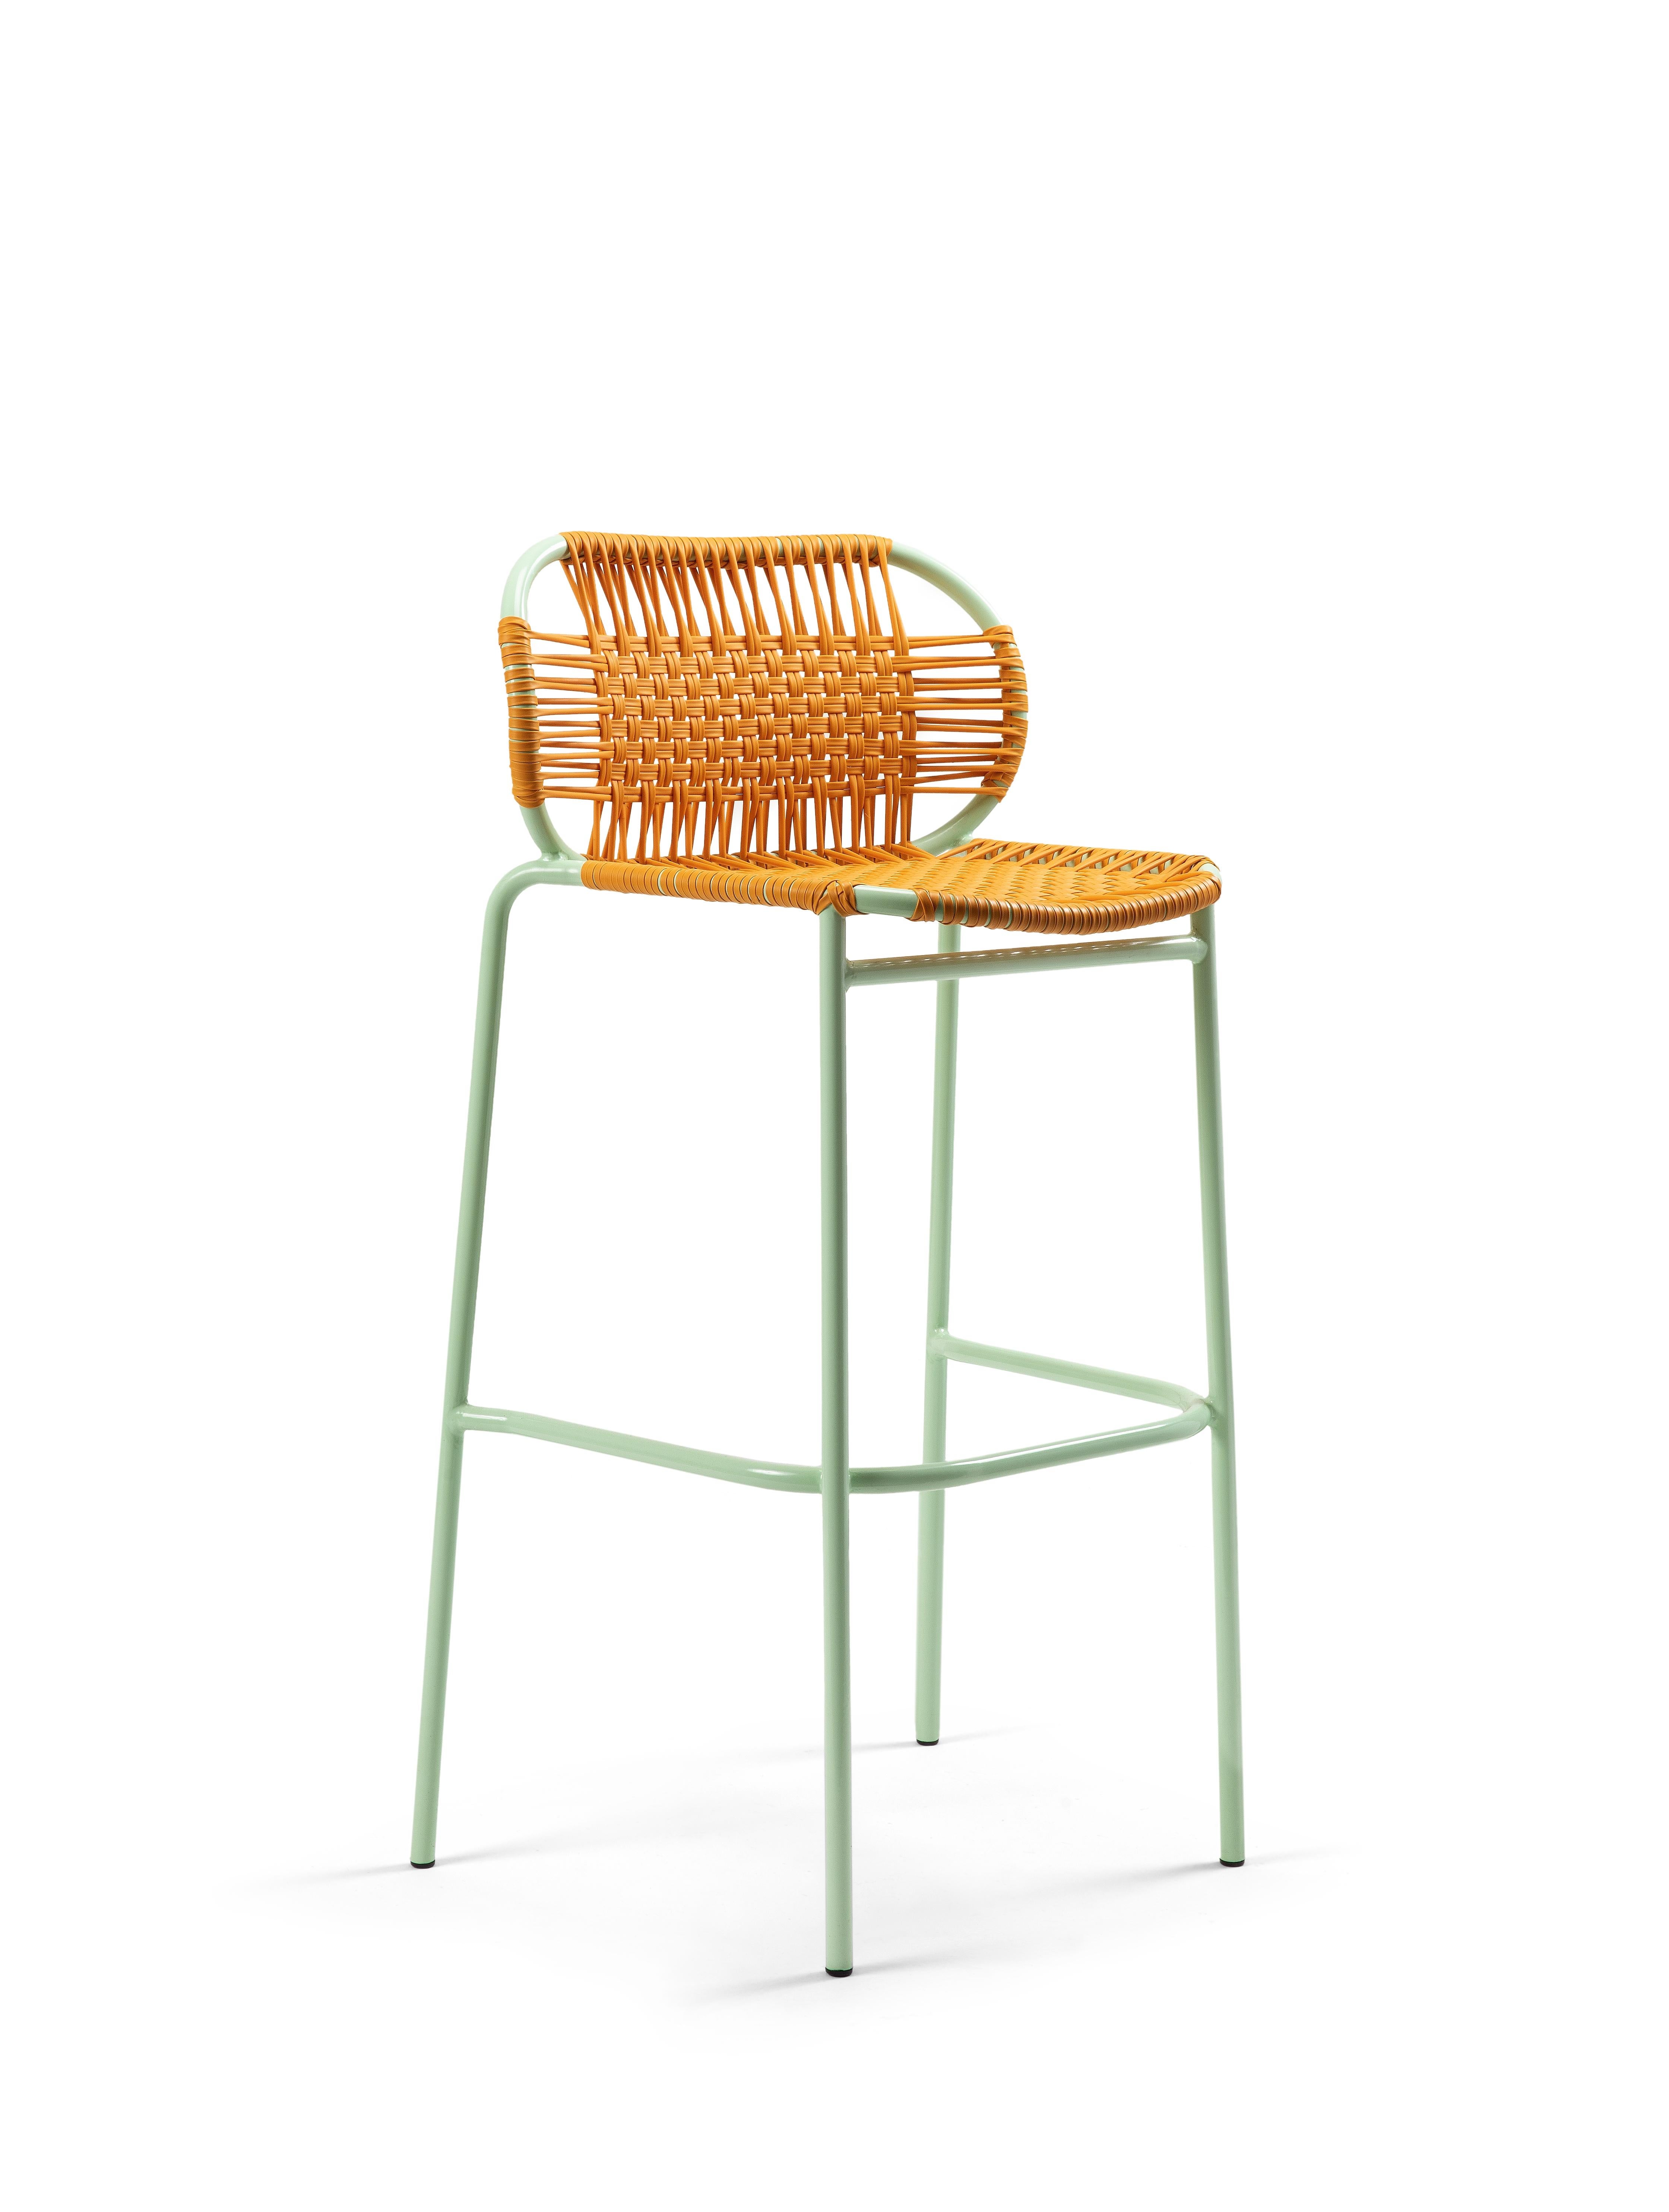 Honey Cielo bar stool by Sebastian Herkner
Materials: Galvanized and powder-coated tubular steel. PVC strings are made from recycled plastic.
Technique: Made from recycled plastic and weaved by local craftspeople in Cartagena, Colombia. 
Dimensions: